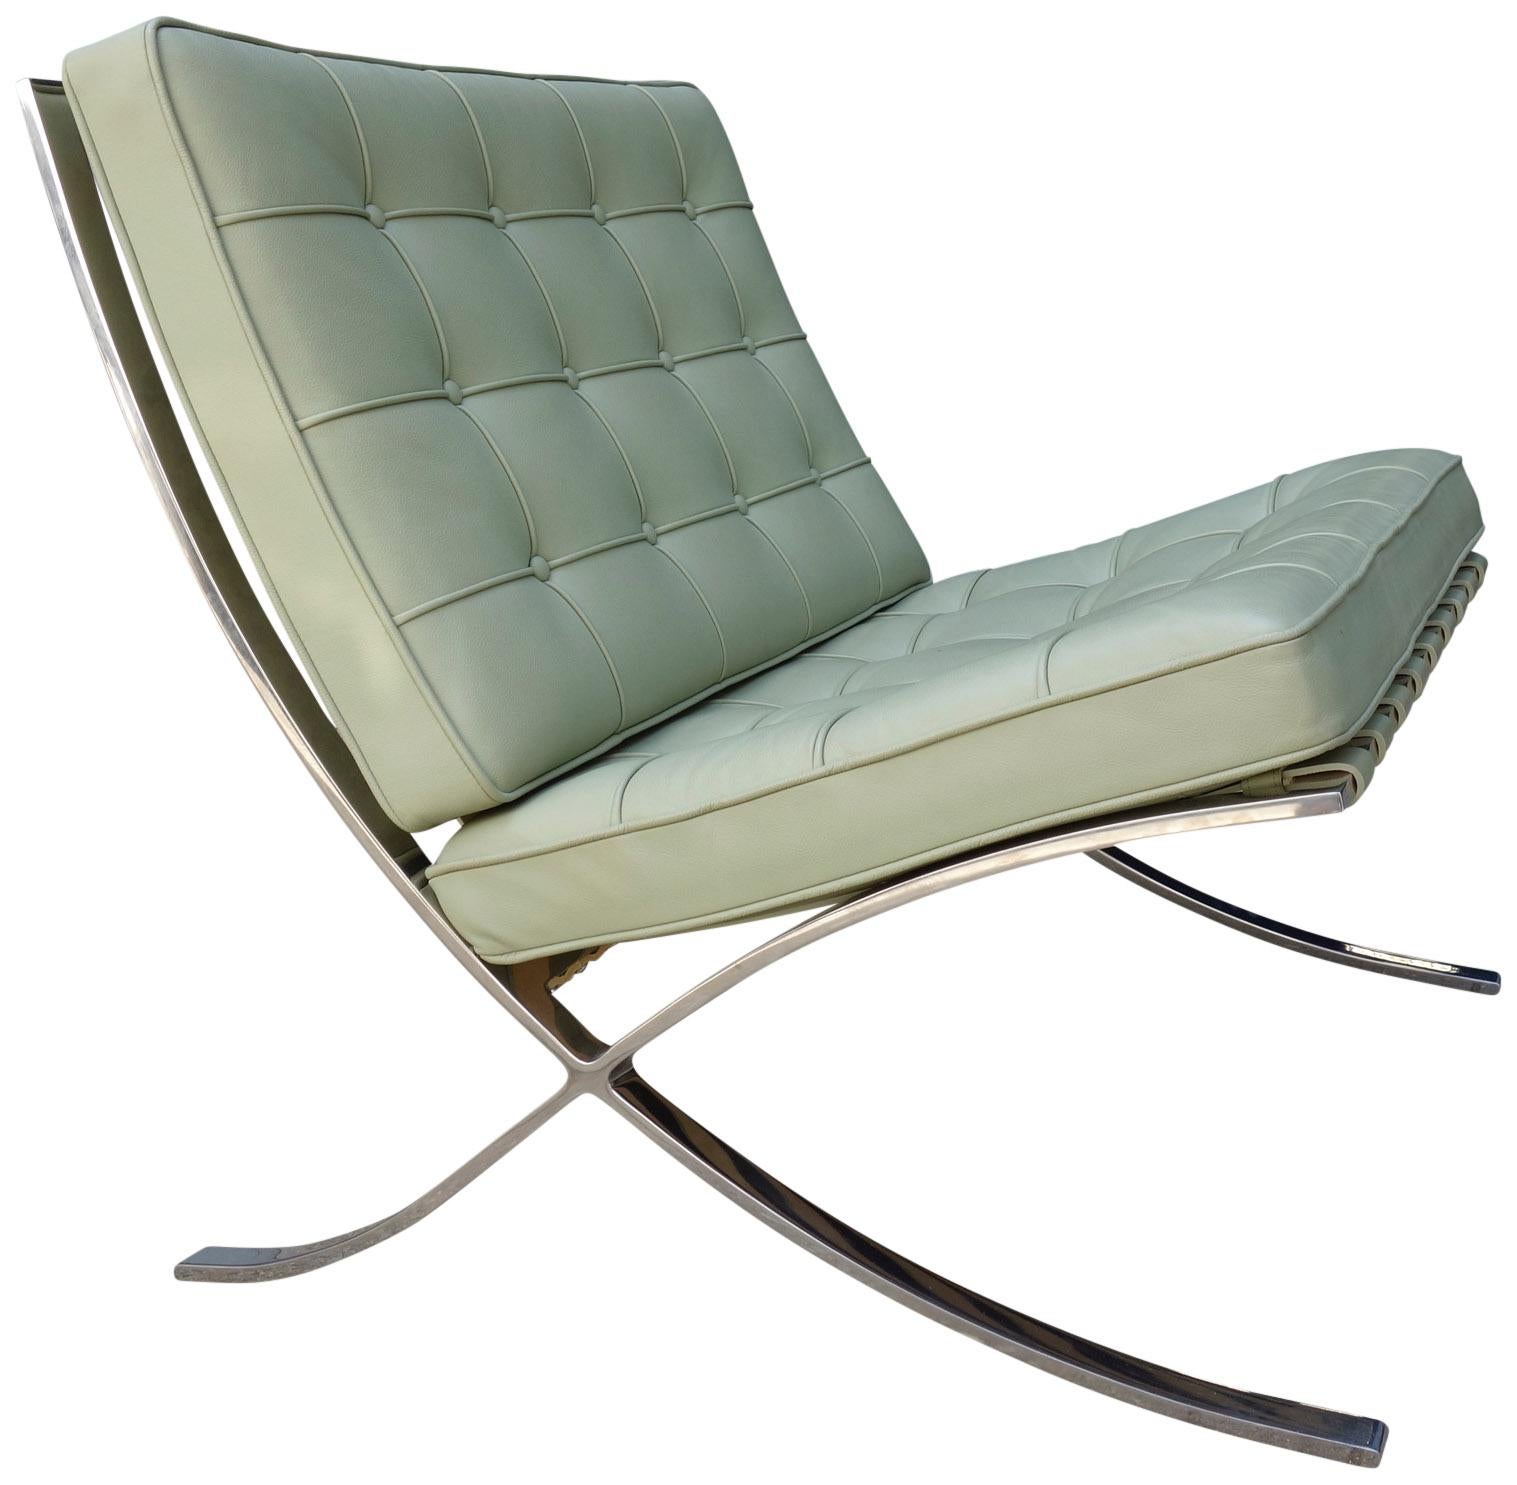 Midcentury Ludwig Mies van der Rohe Barcelona chairs for Knoll. The Classic chair that helped define midcentury modernism. This is the highly desirable version produced in non magnetic premium grade 304 bar stock stainless steel hand-buffed to a